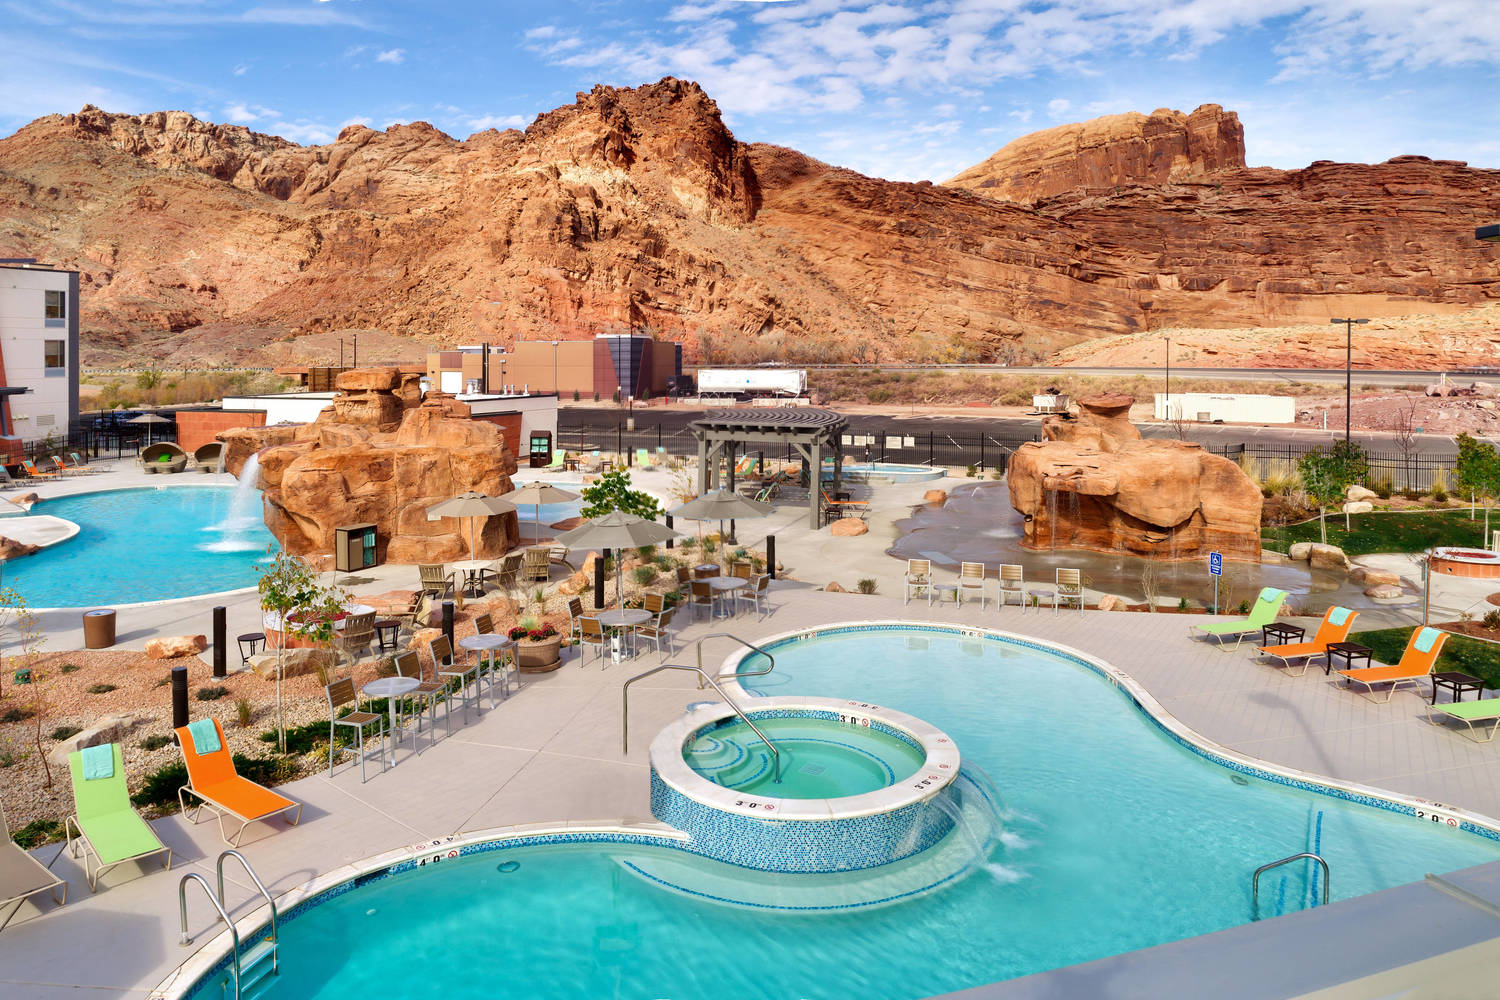 SpringHill Suites Moab  Moab  Jobs Hospitality Online